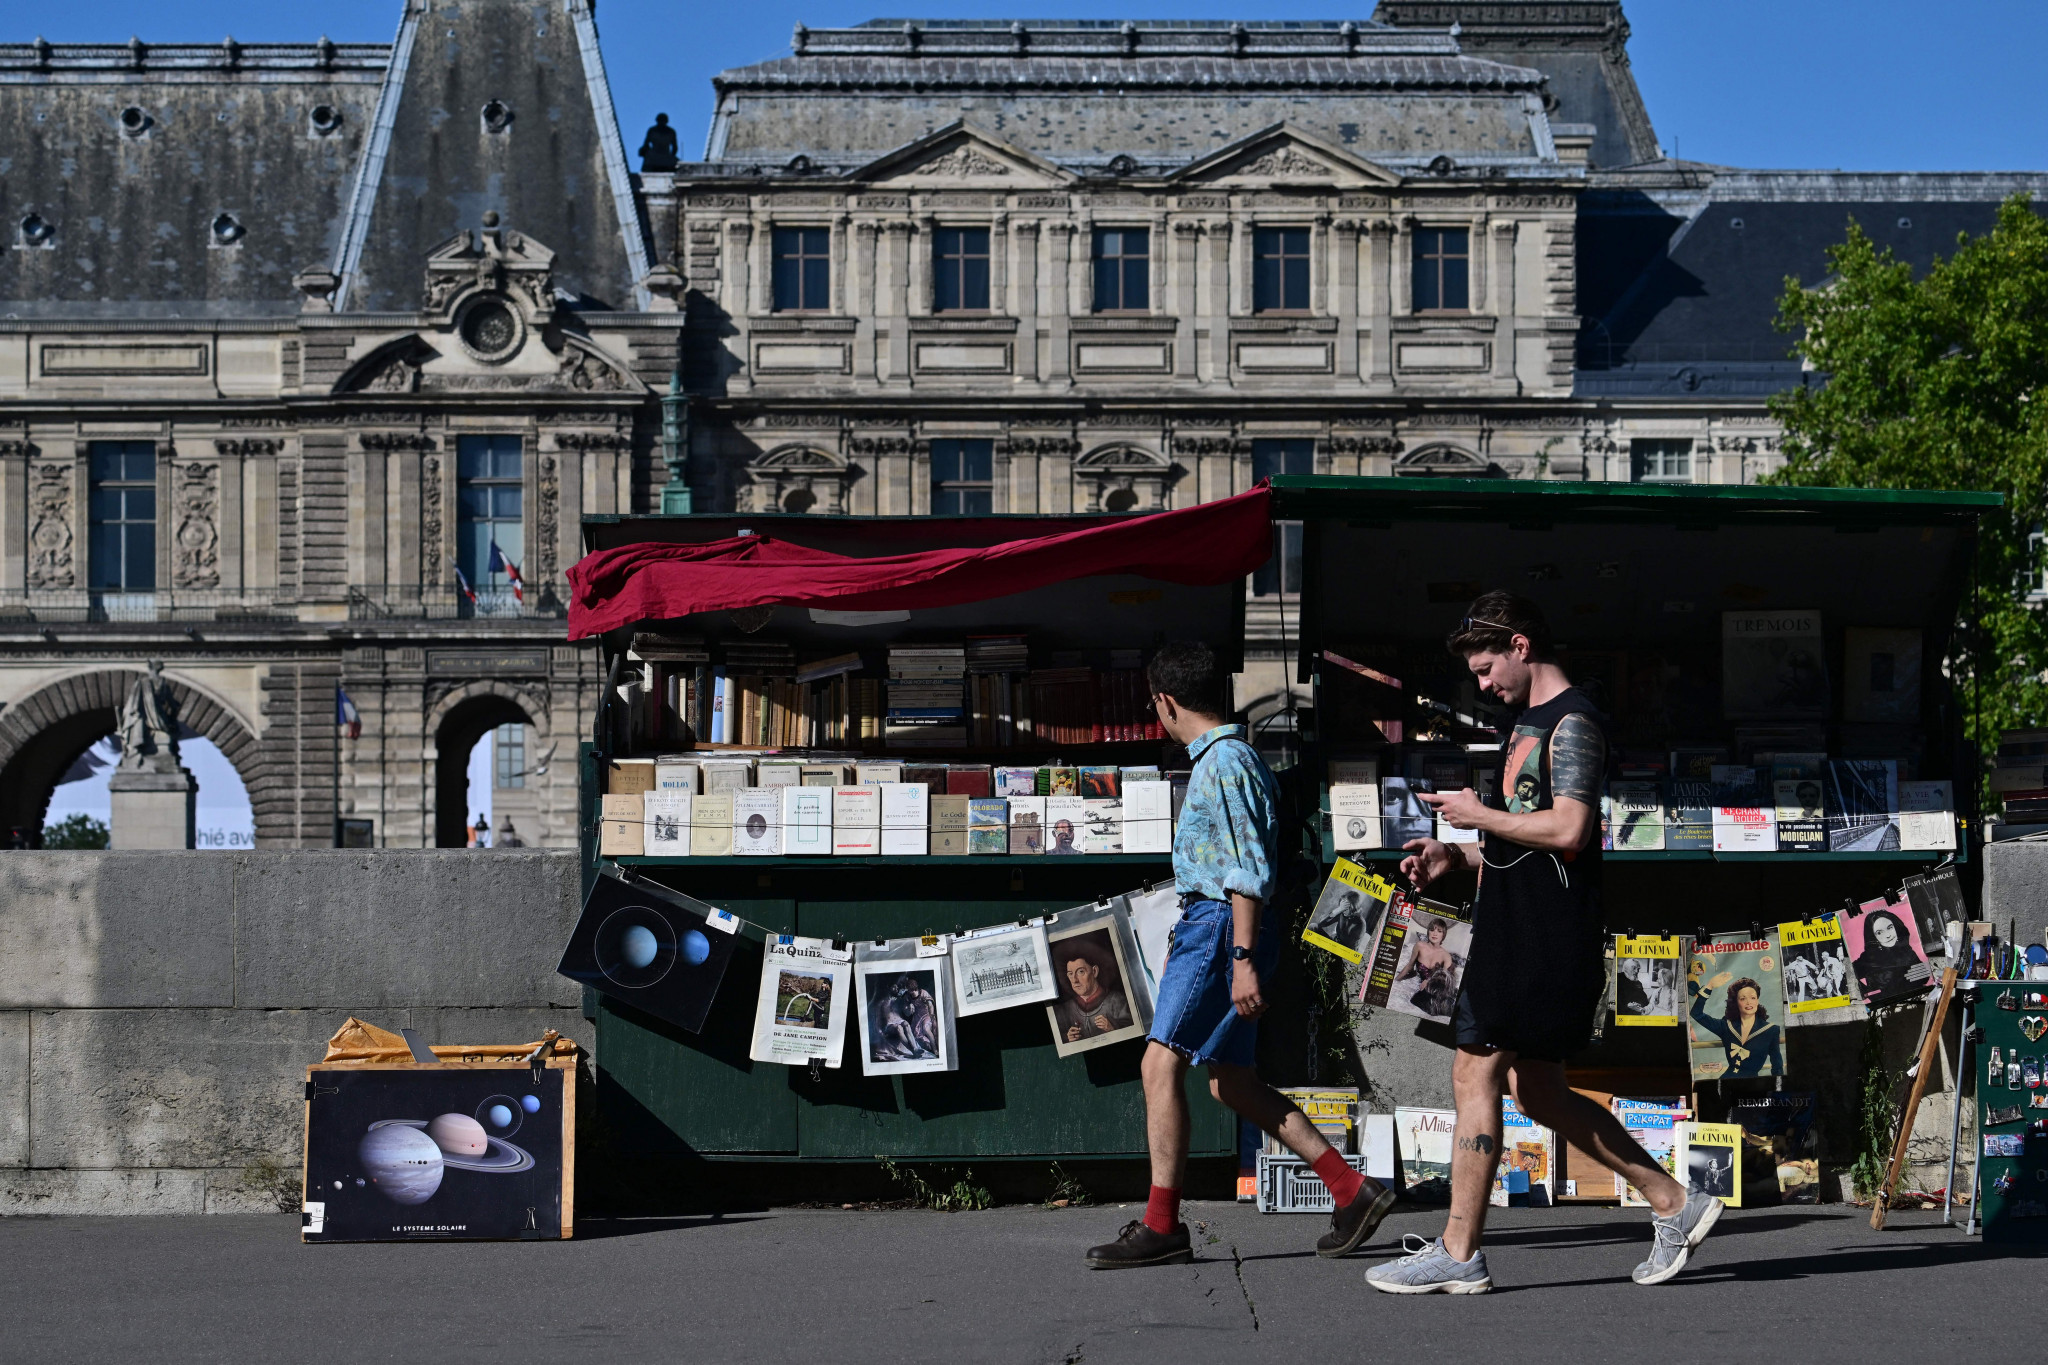 The booksellers on the banks of the River Seine have been told they will be moved for the Olympics ©Getty Images